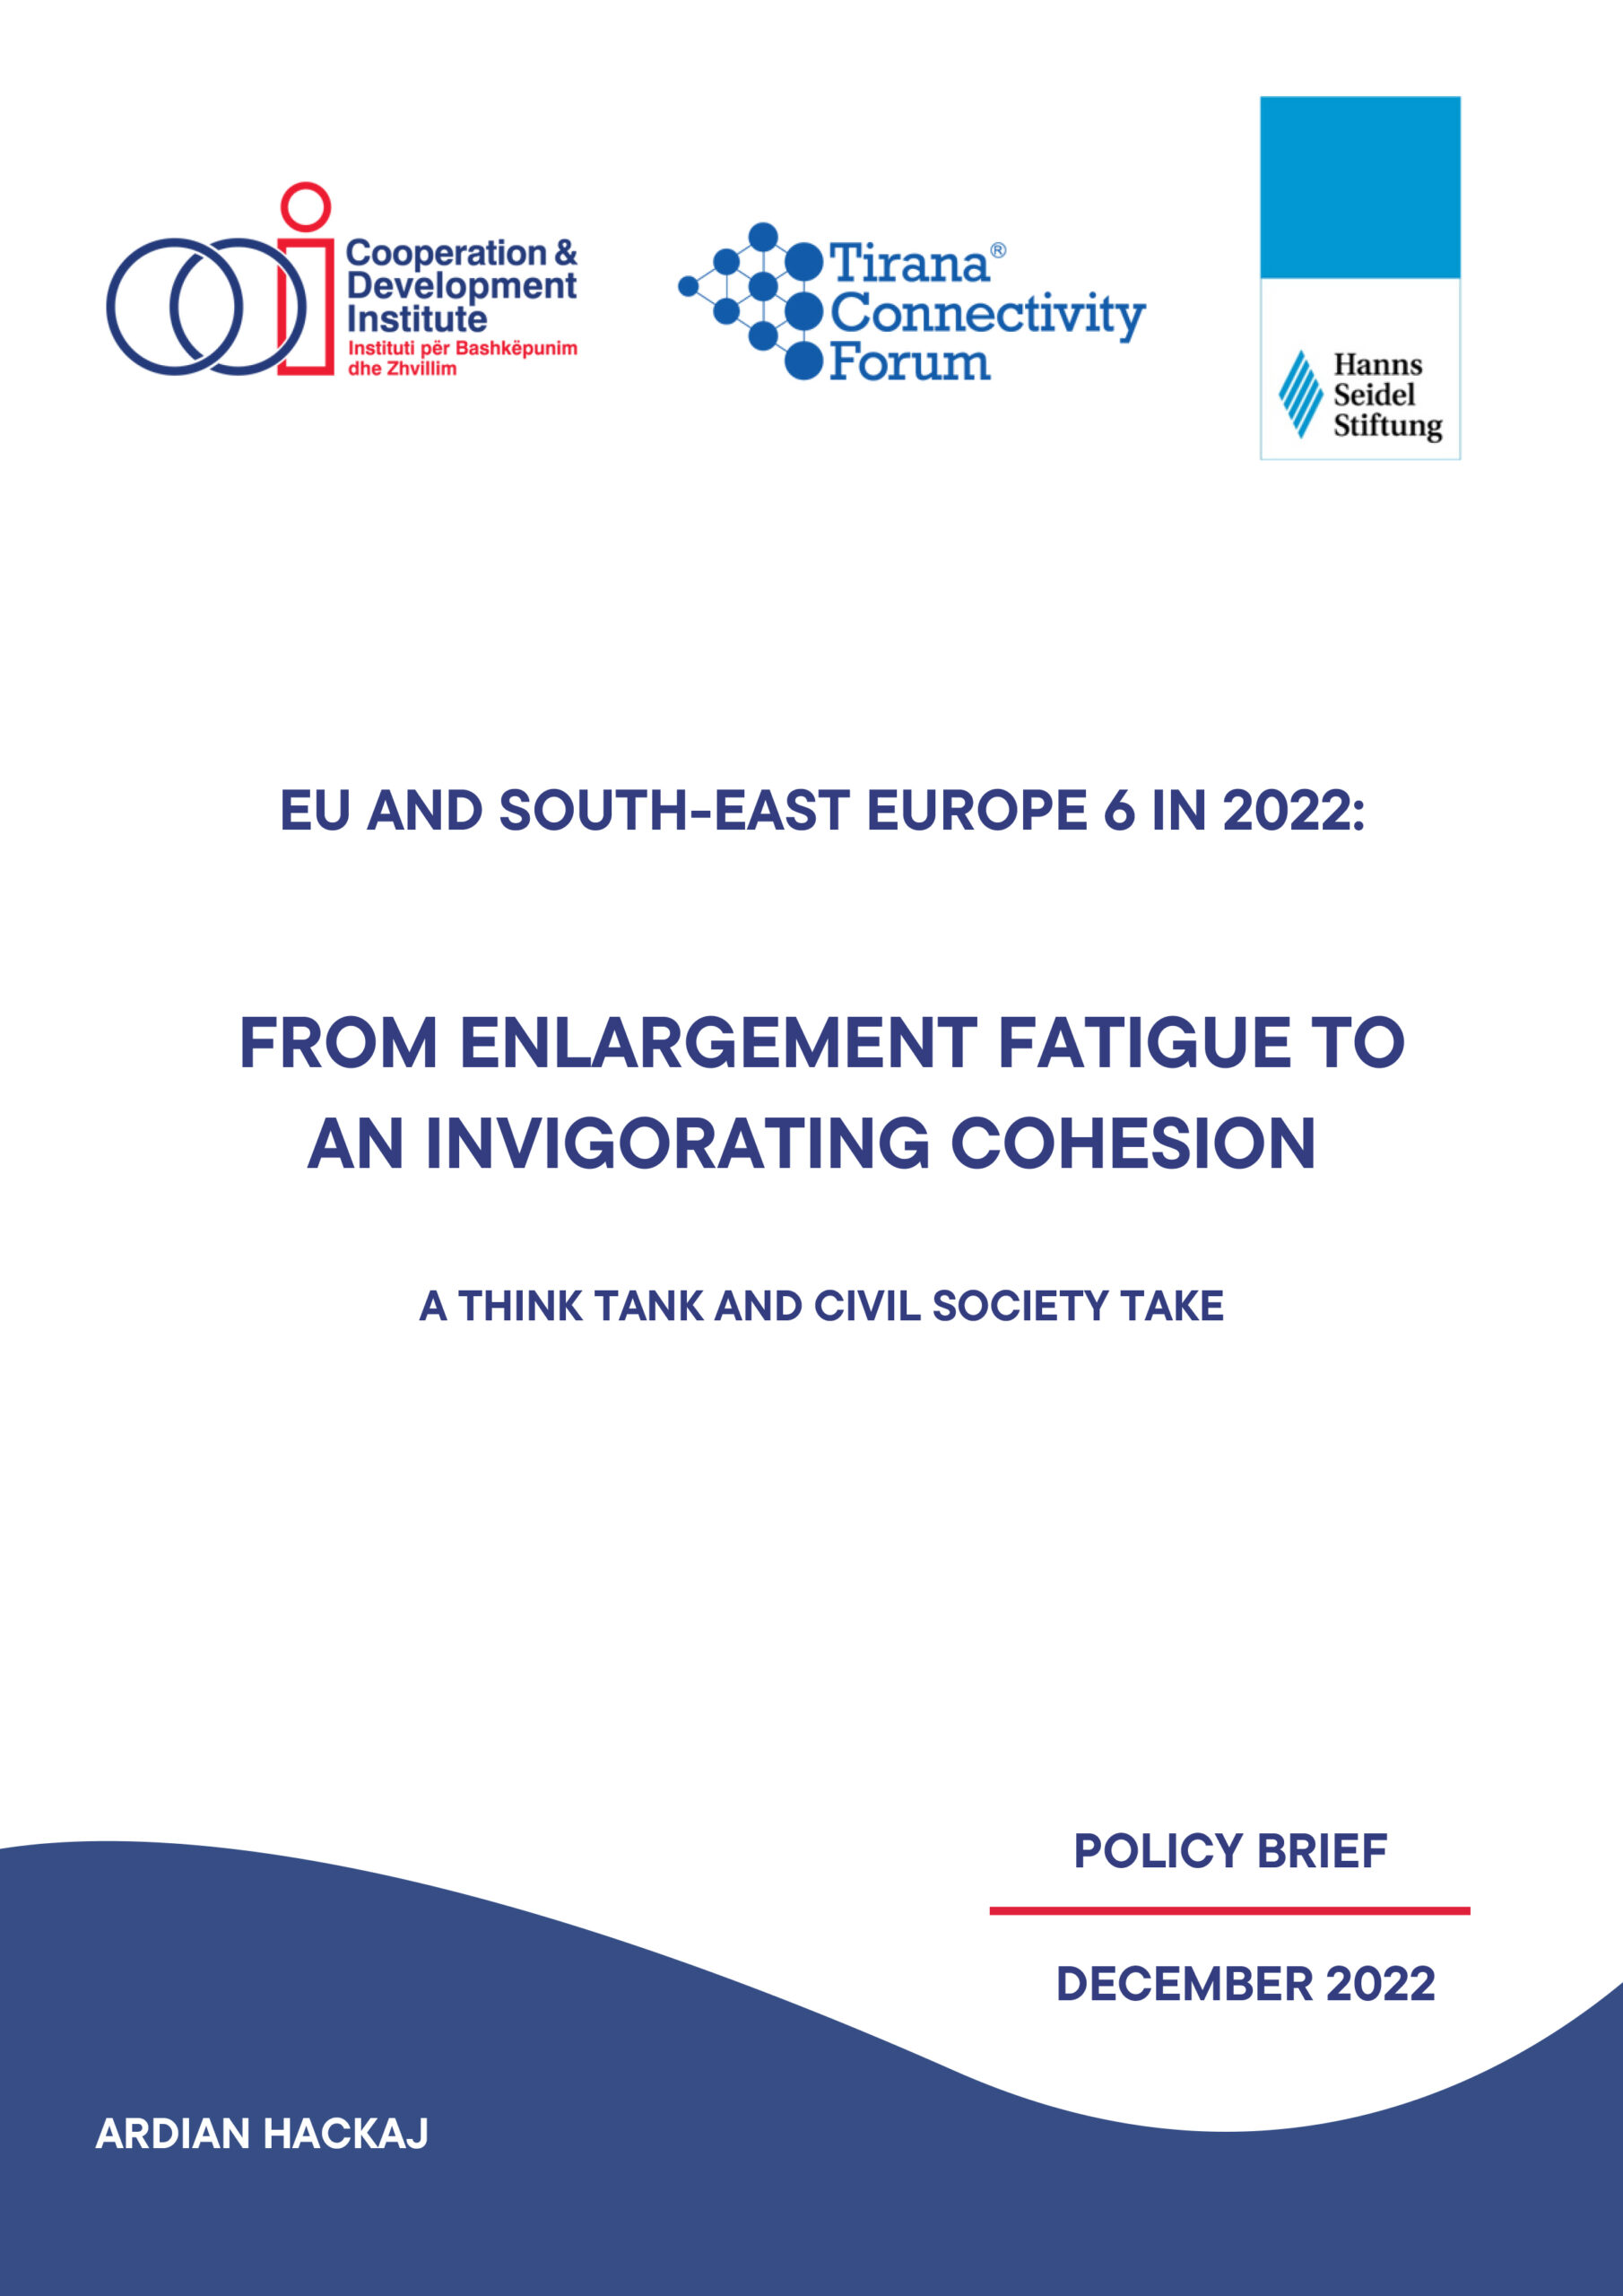 From Enlargement Fatigue to an Invigorating Cohesion: EU and South-East Europe 6 in 2022